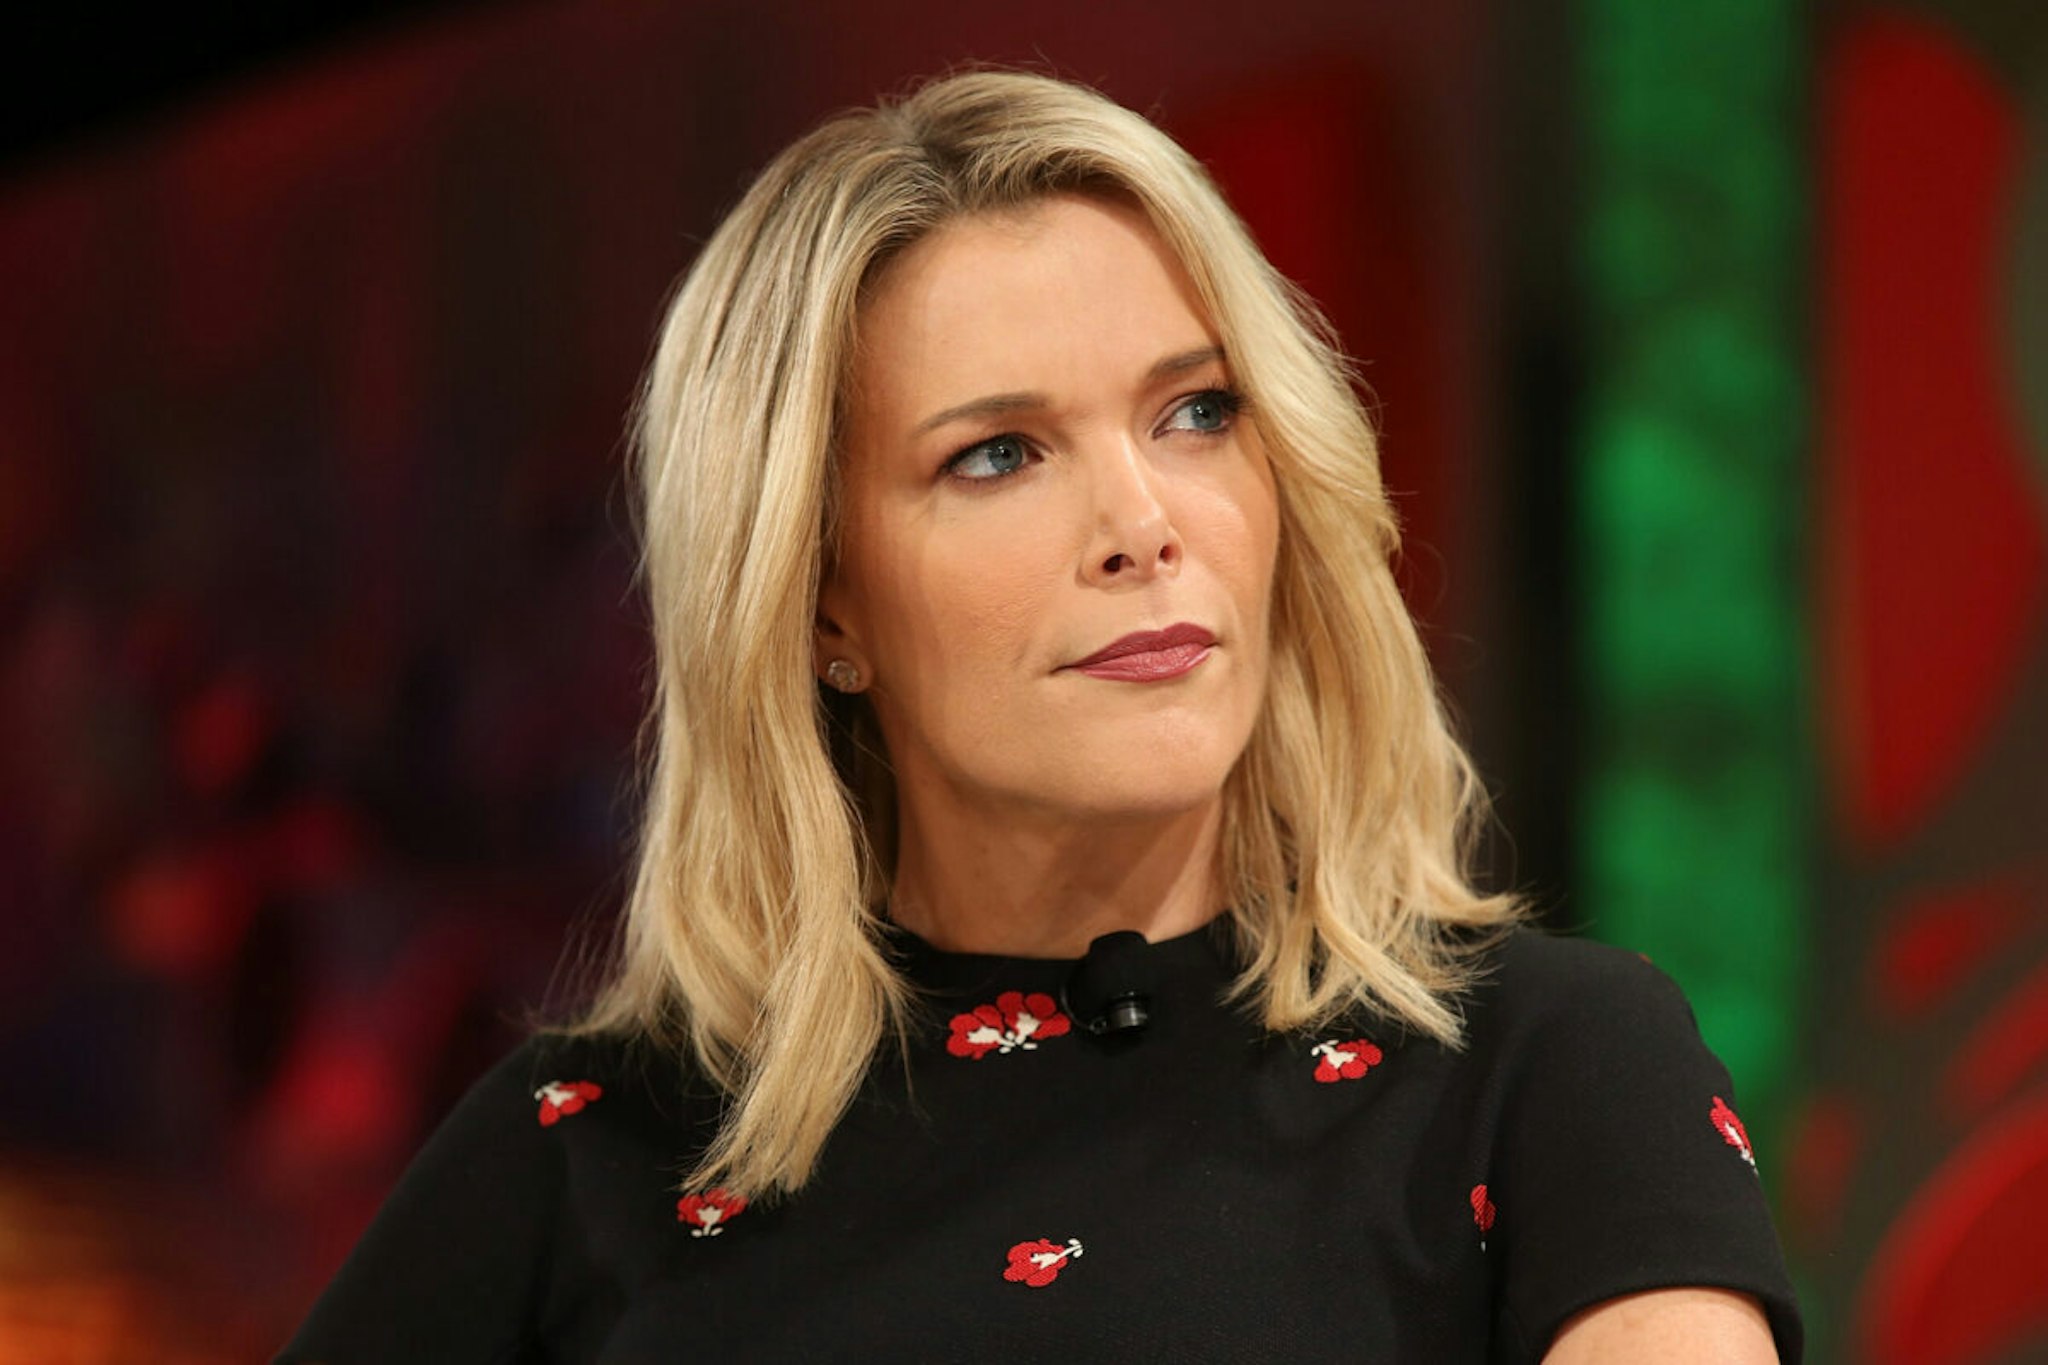 Megyn Kelly speaks onstage at the Fortune Most Powerful Women Summit 2018 at Ritz Carlton Hotel on October 2, 2018 in Laguna Niguel, California